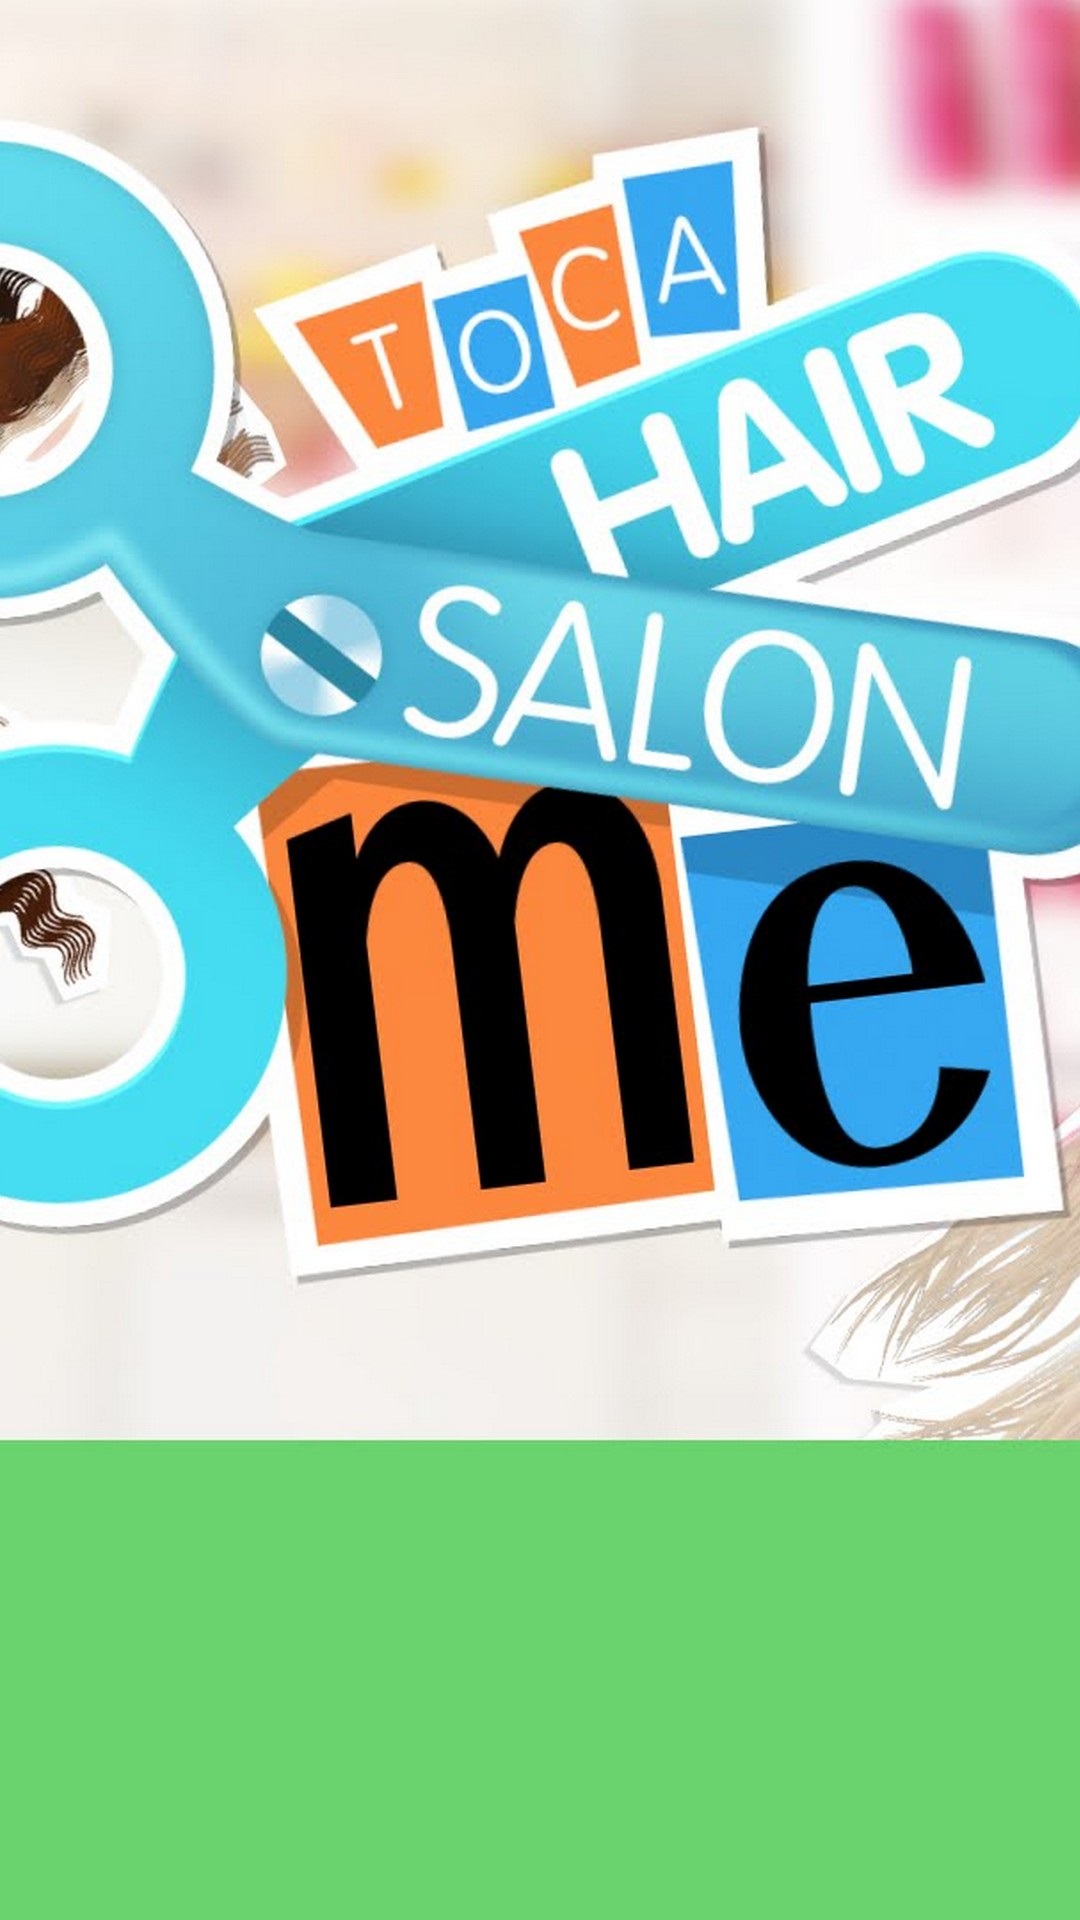 Toca Hair Salon 3 Me is a fun game for kids to play and create hairstyles. - Toca Boca